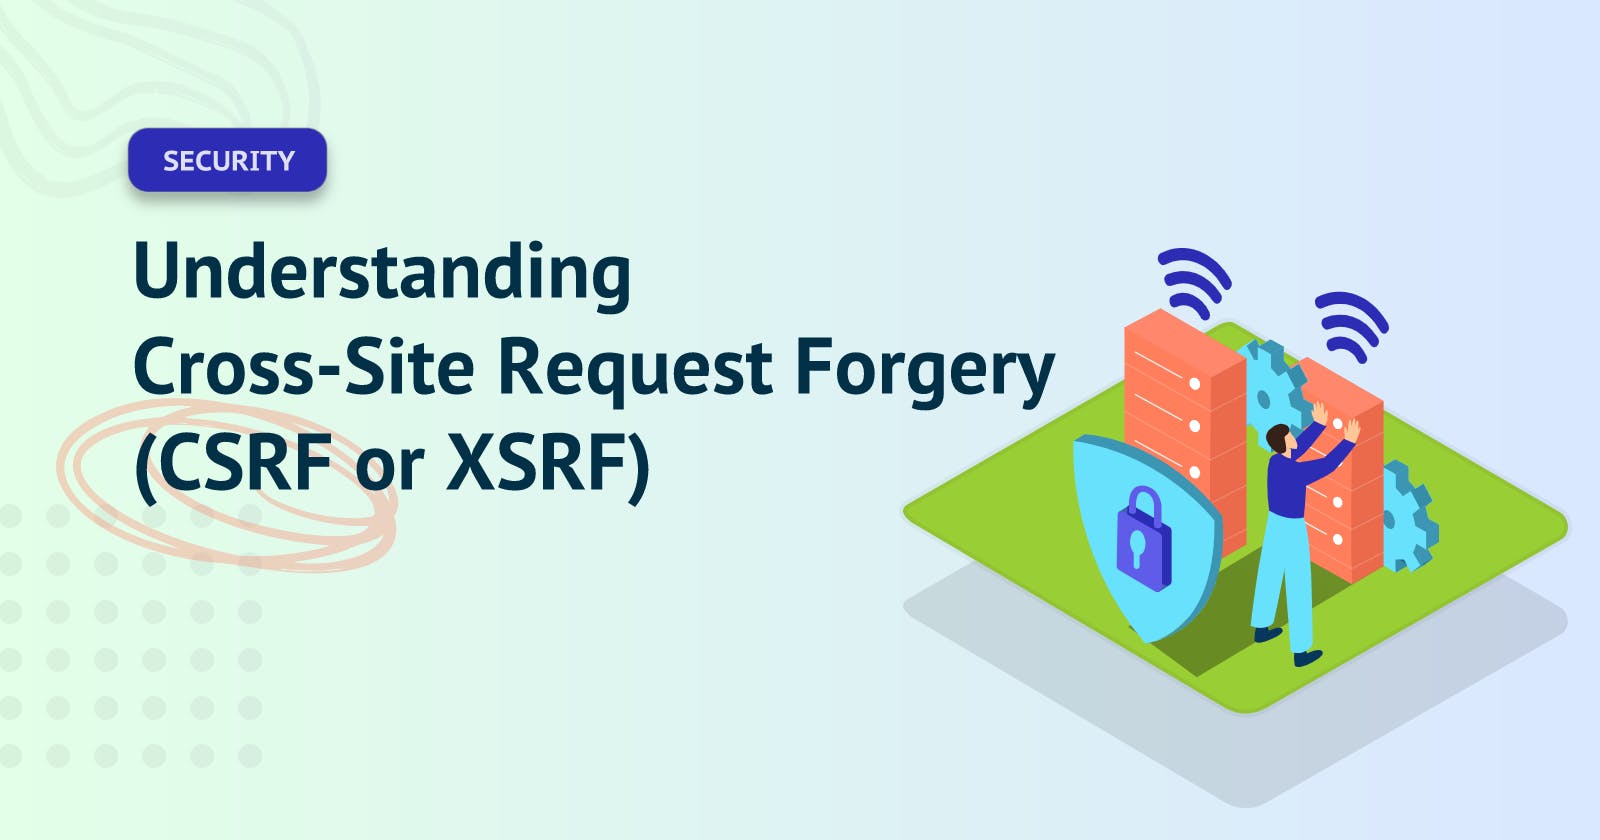 Understanding Cross-Site Request Forgery (CSRF or XSRF)